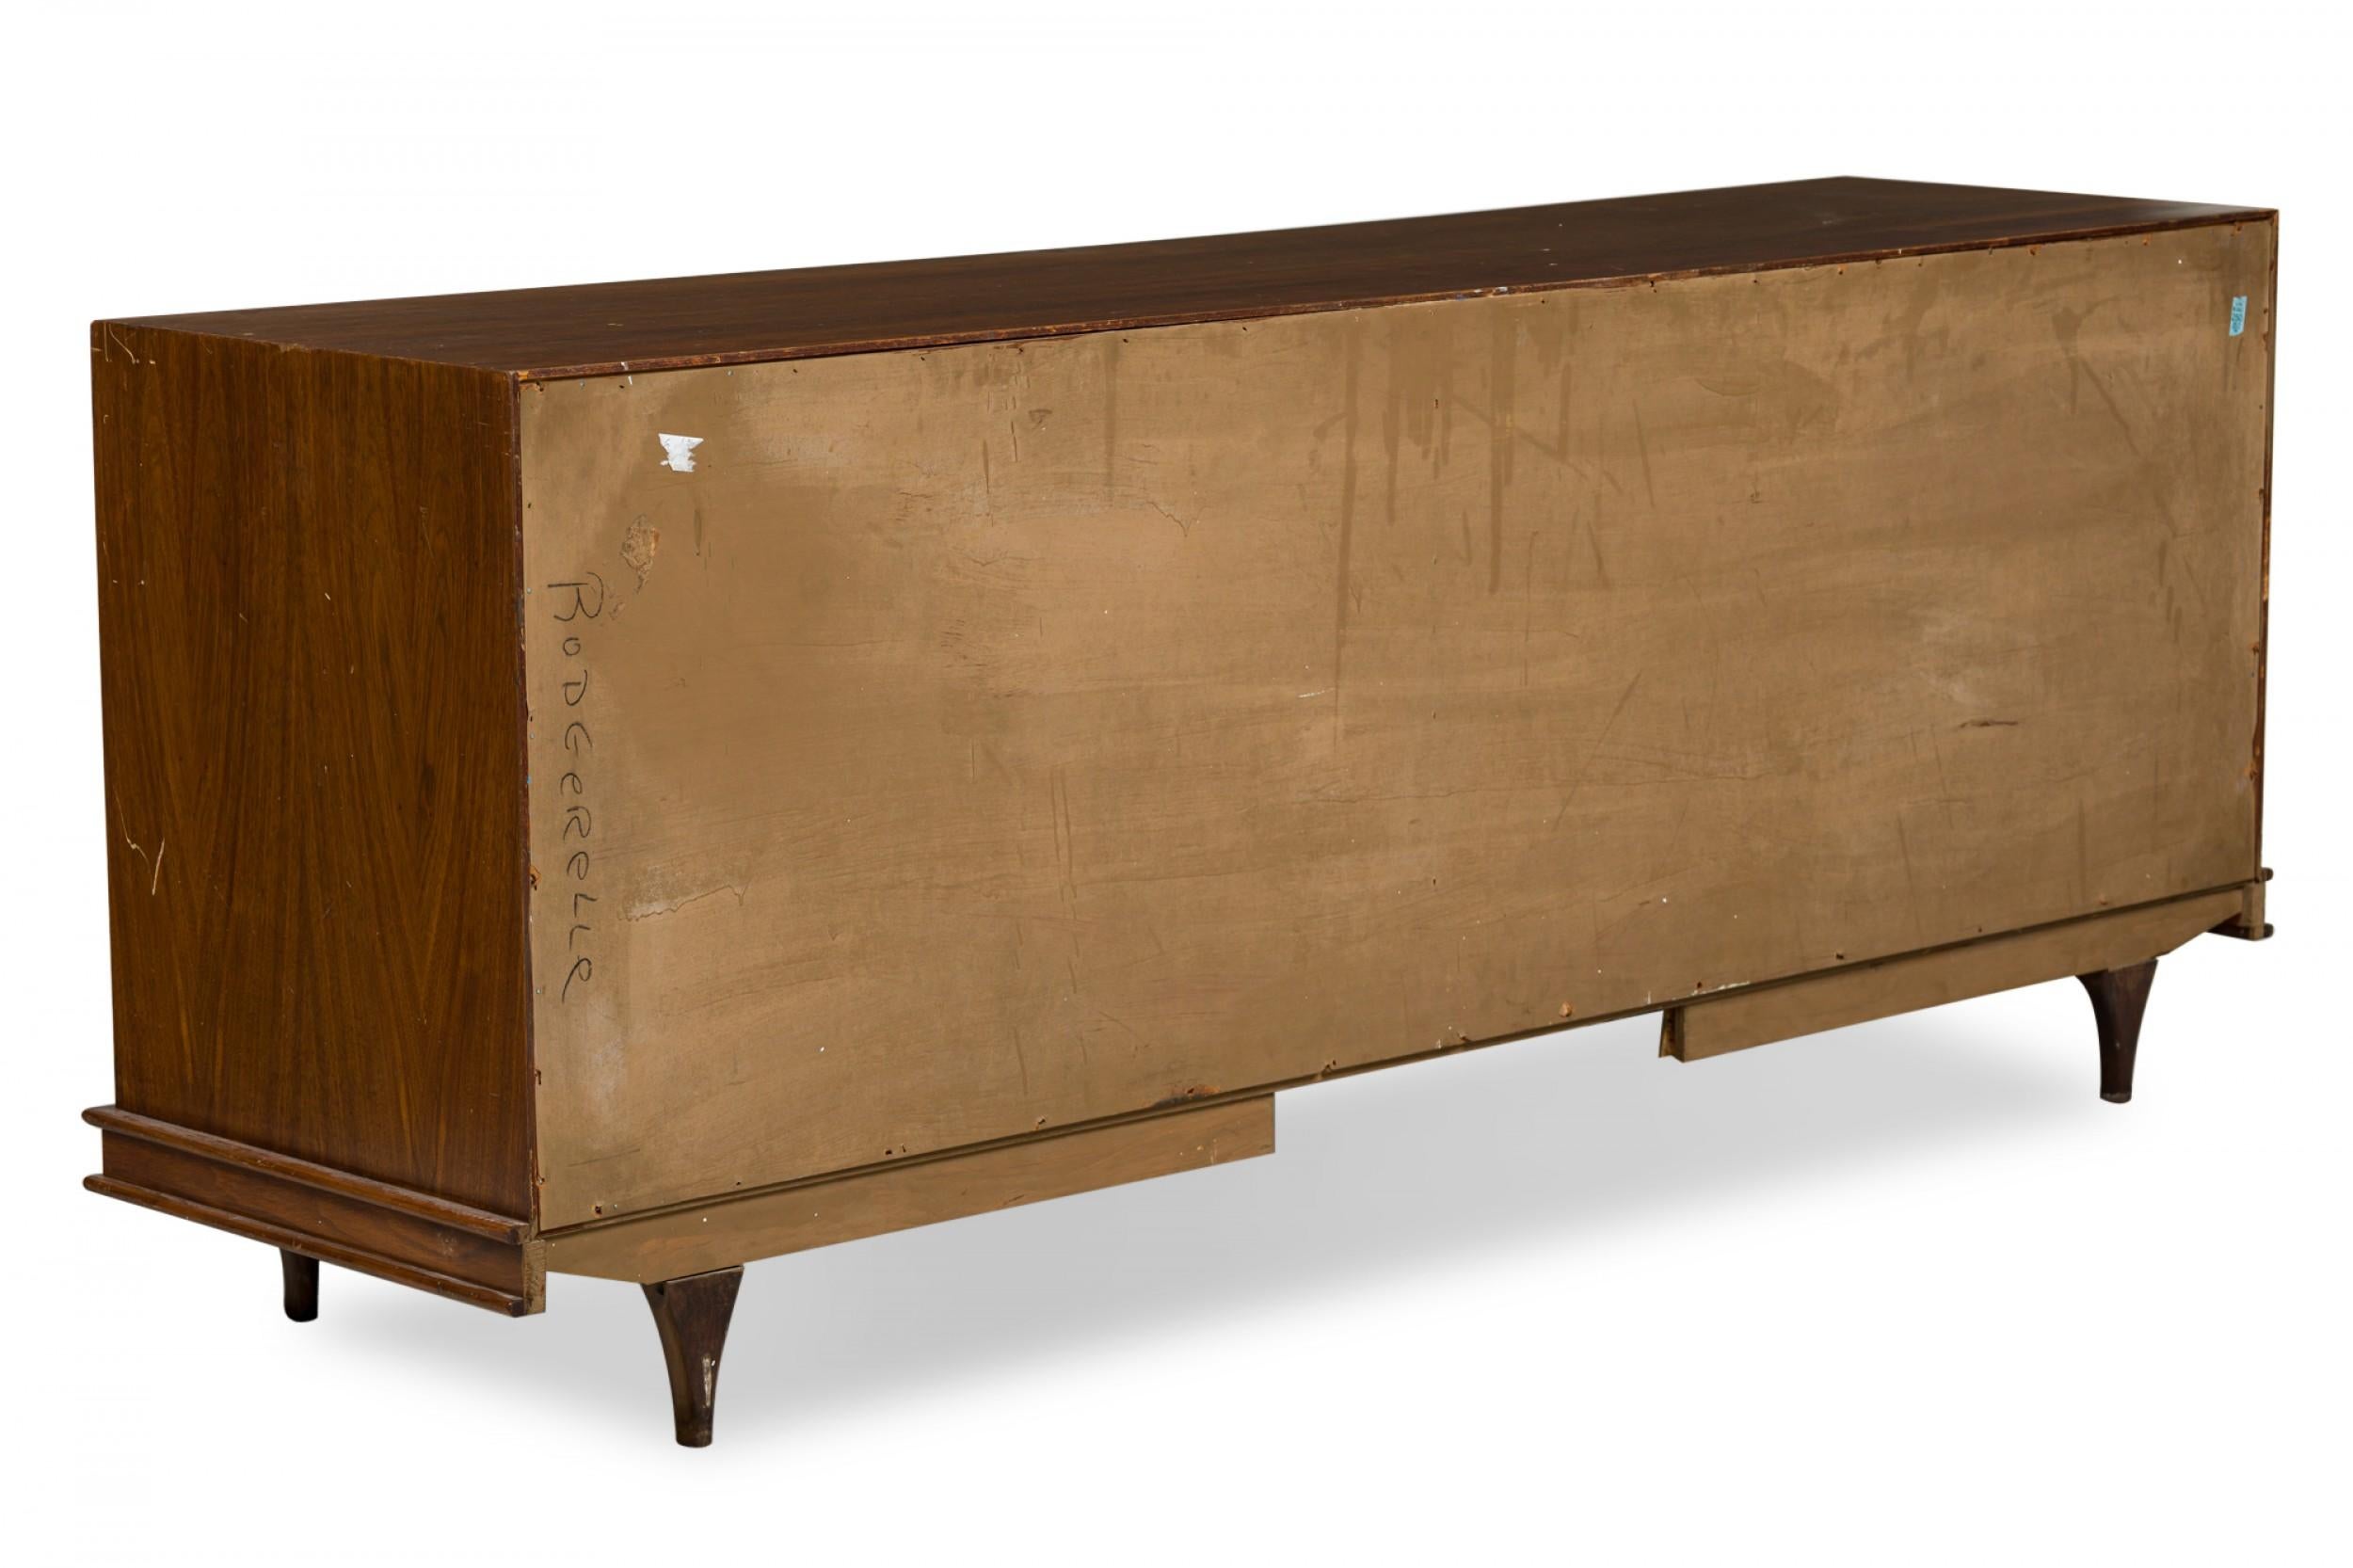 Wood StanleyAmerican Mid-Century Modern Walnut Geometric Carved Front Sideboard For Sale